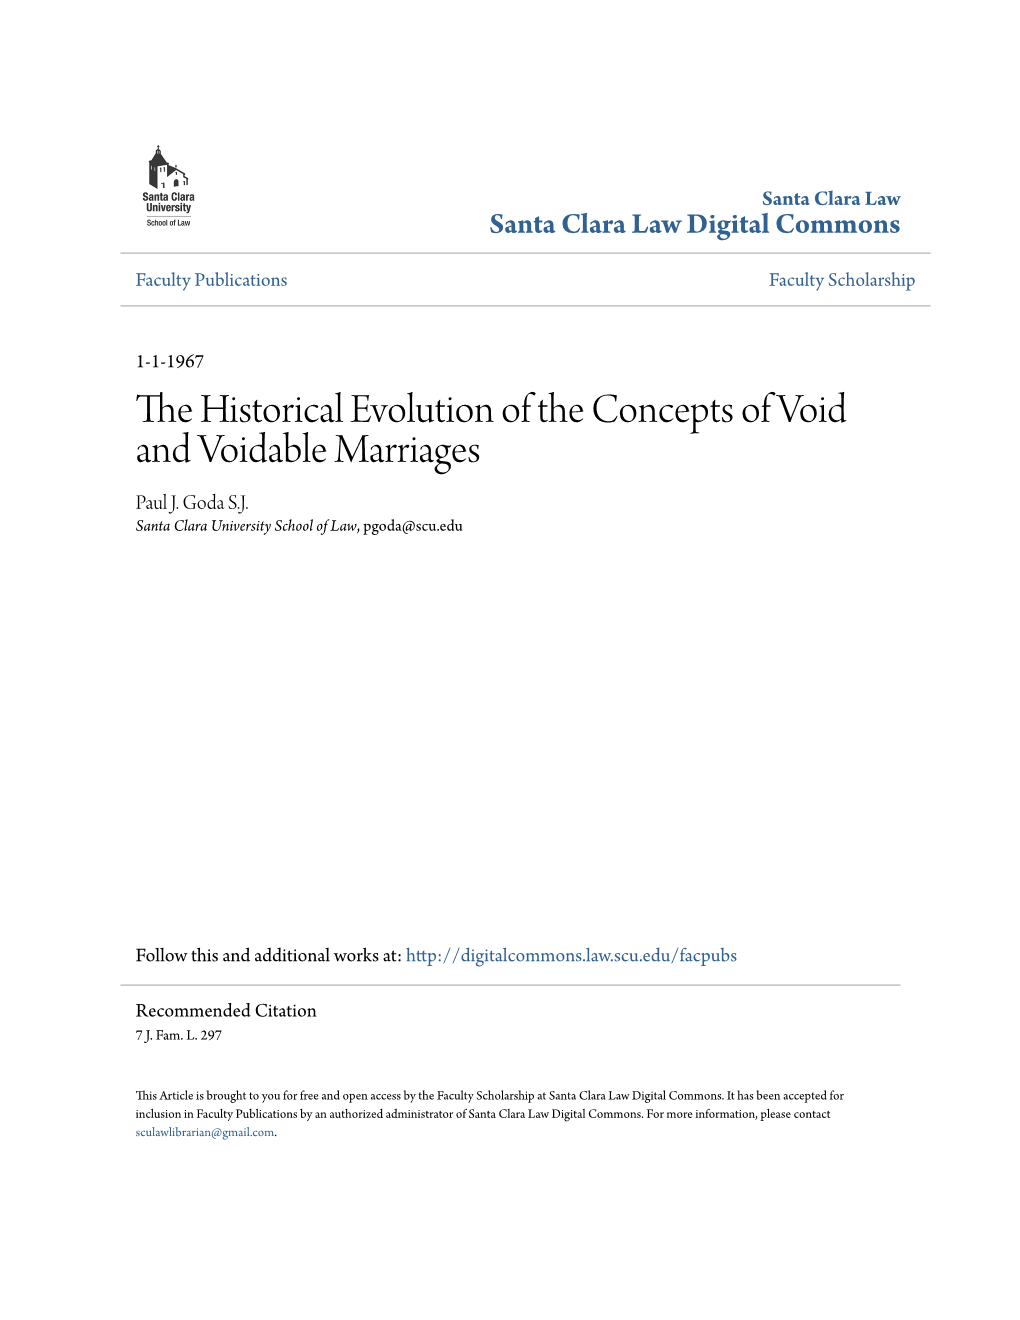 The Historical Evolution of the Concepts of Void and Voidable Marriages